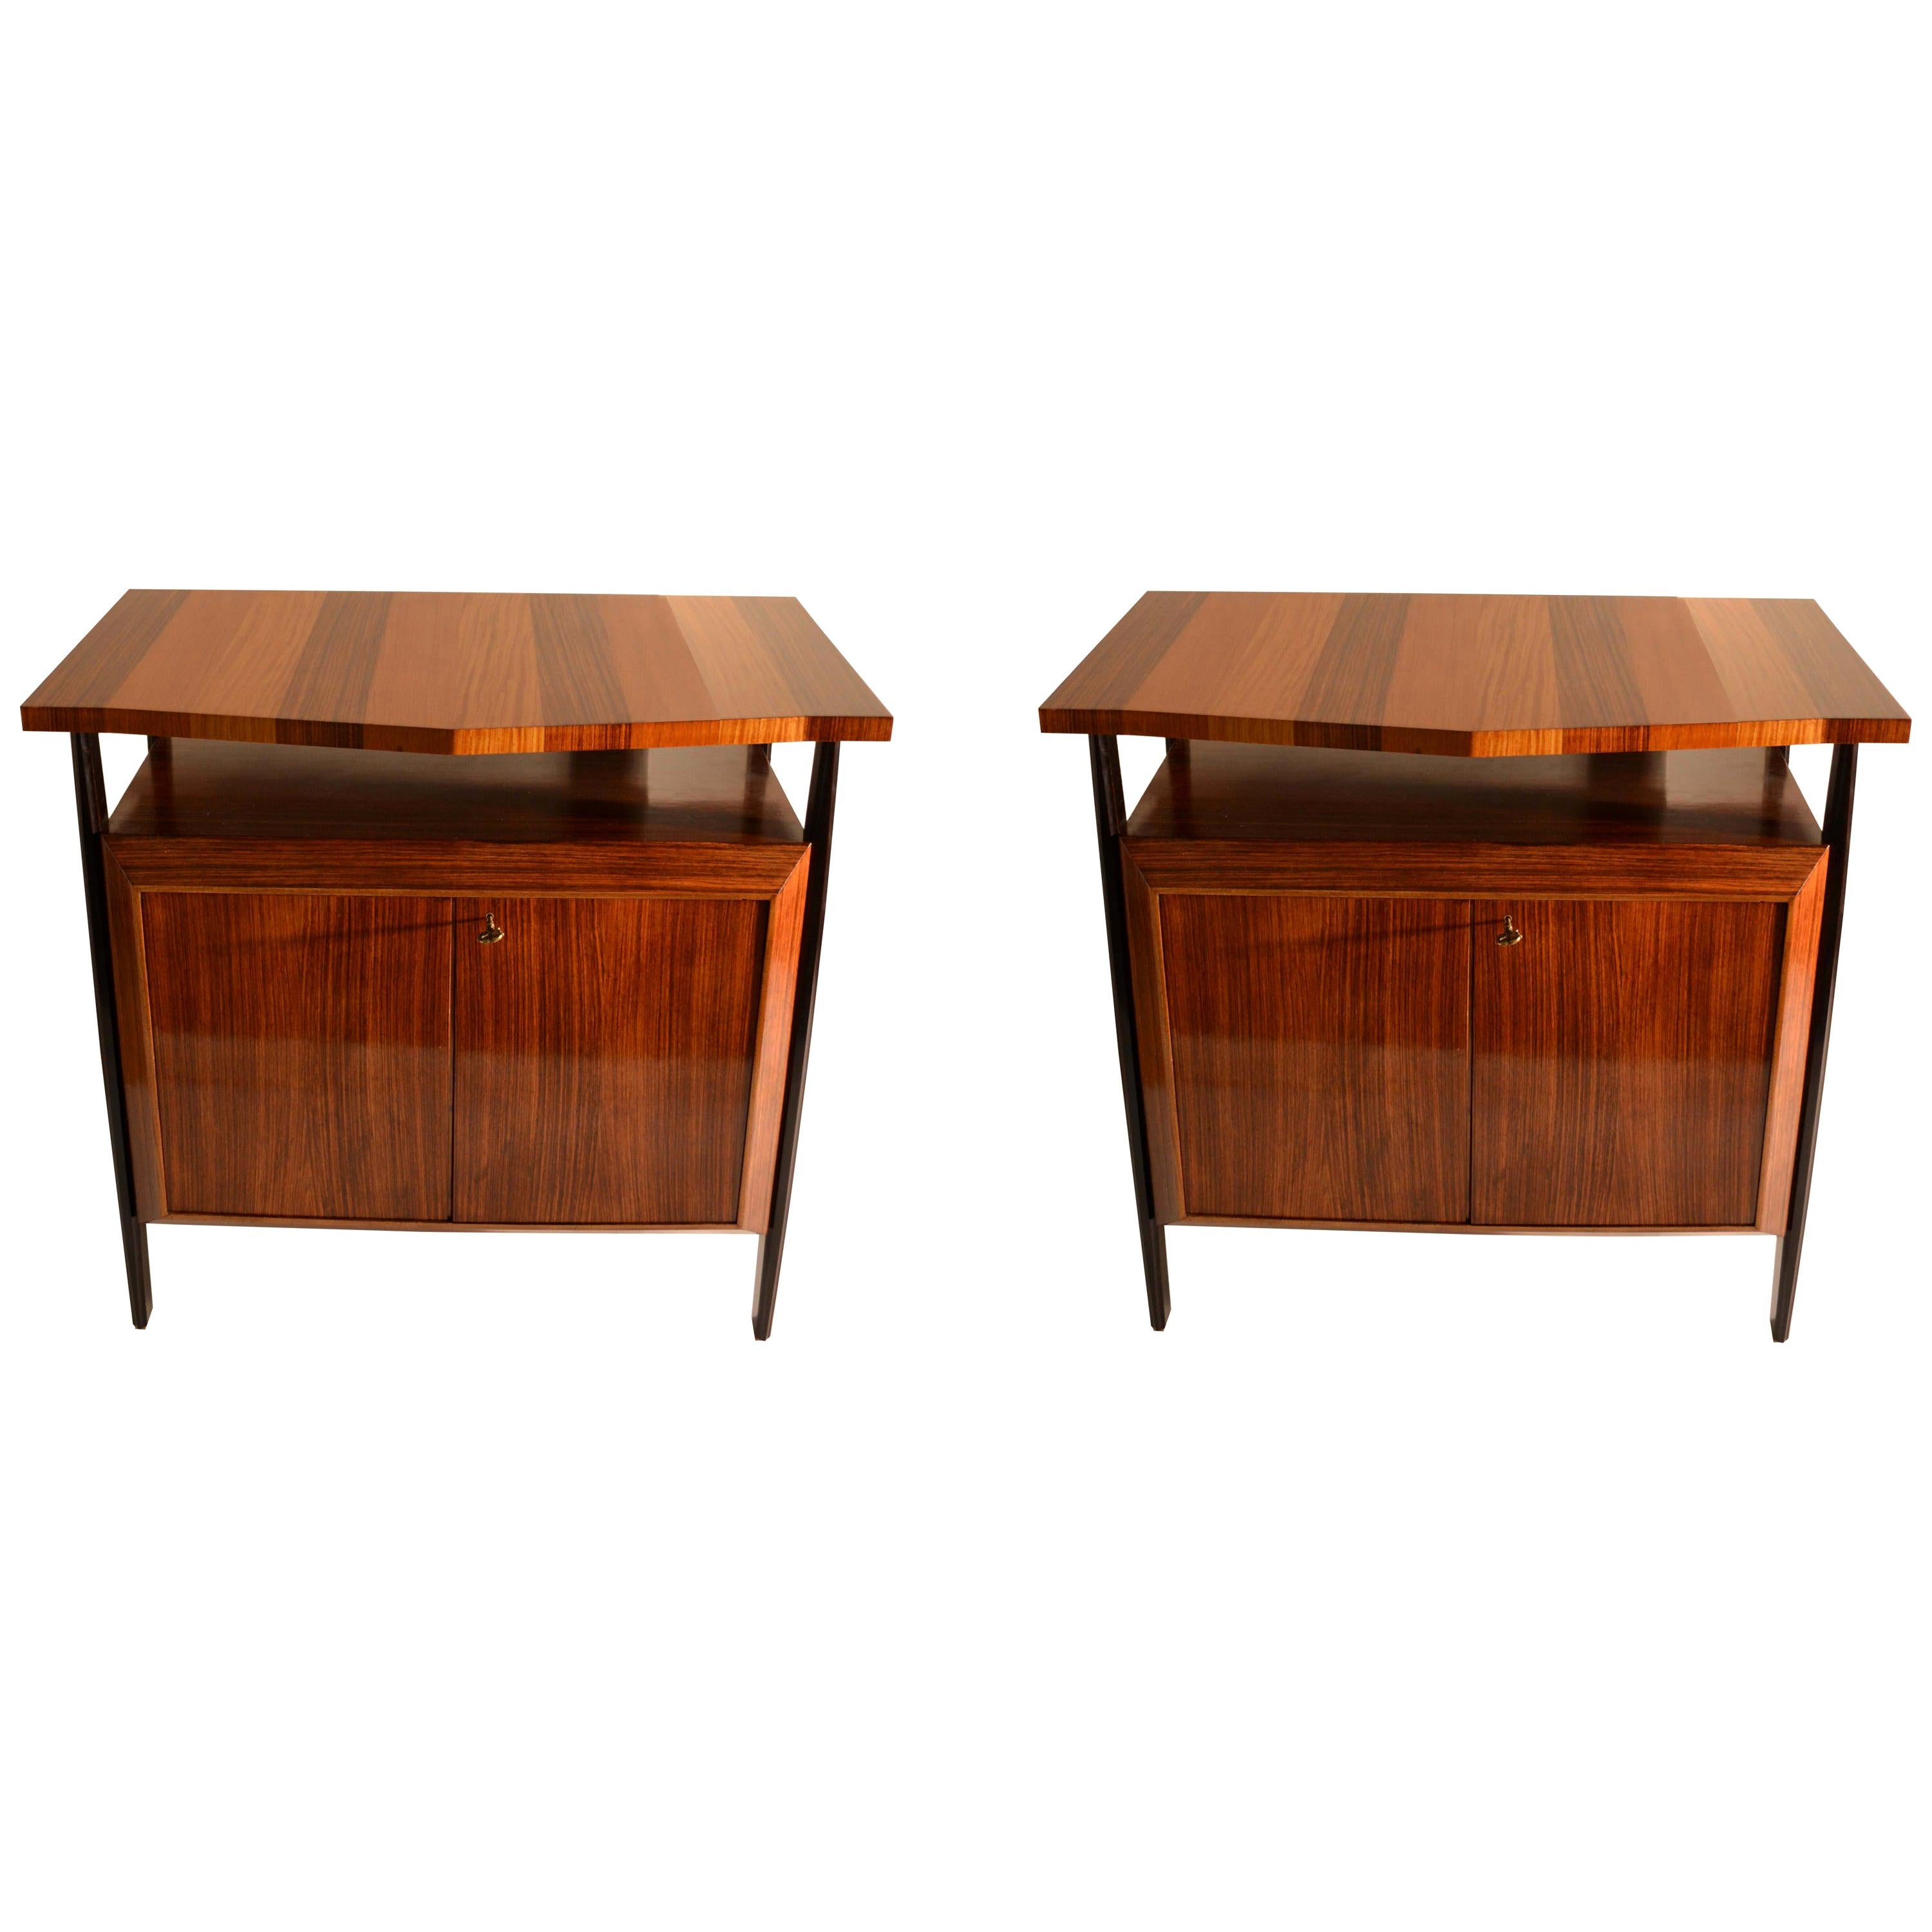 Pair of Cabinets in Blond and Paiisander Veneers Attributed to Ico Parisi